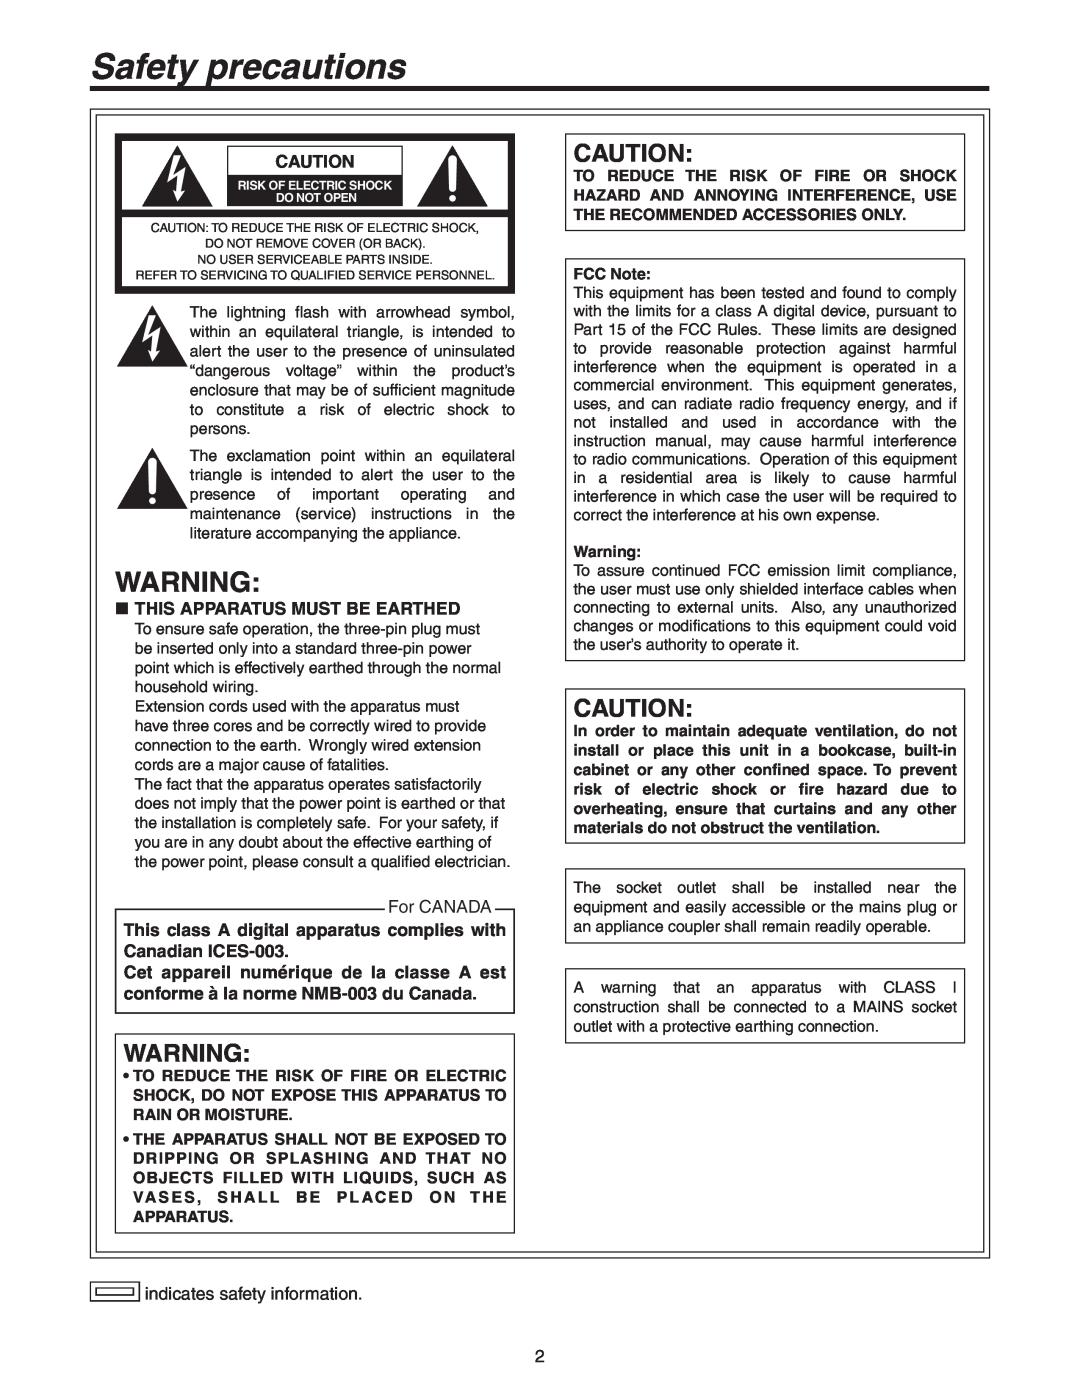 Panasonic AW-RP50N operating instructions Safety precautions, This Apparatus Must Be Earthed 